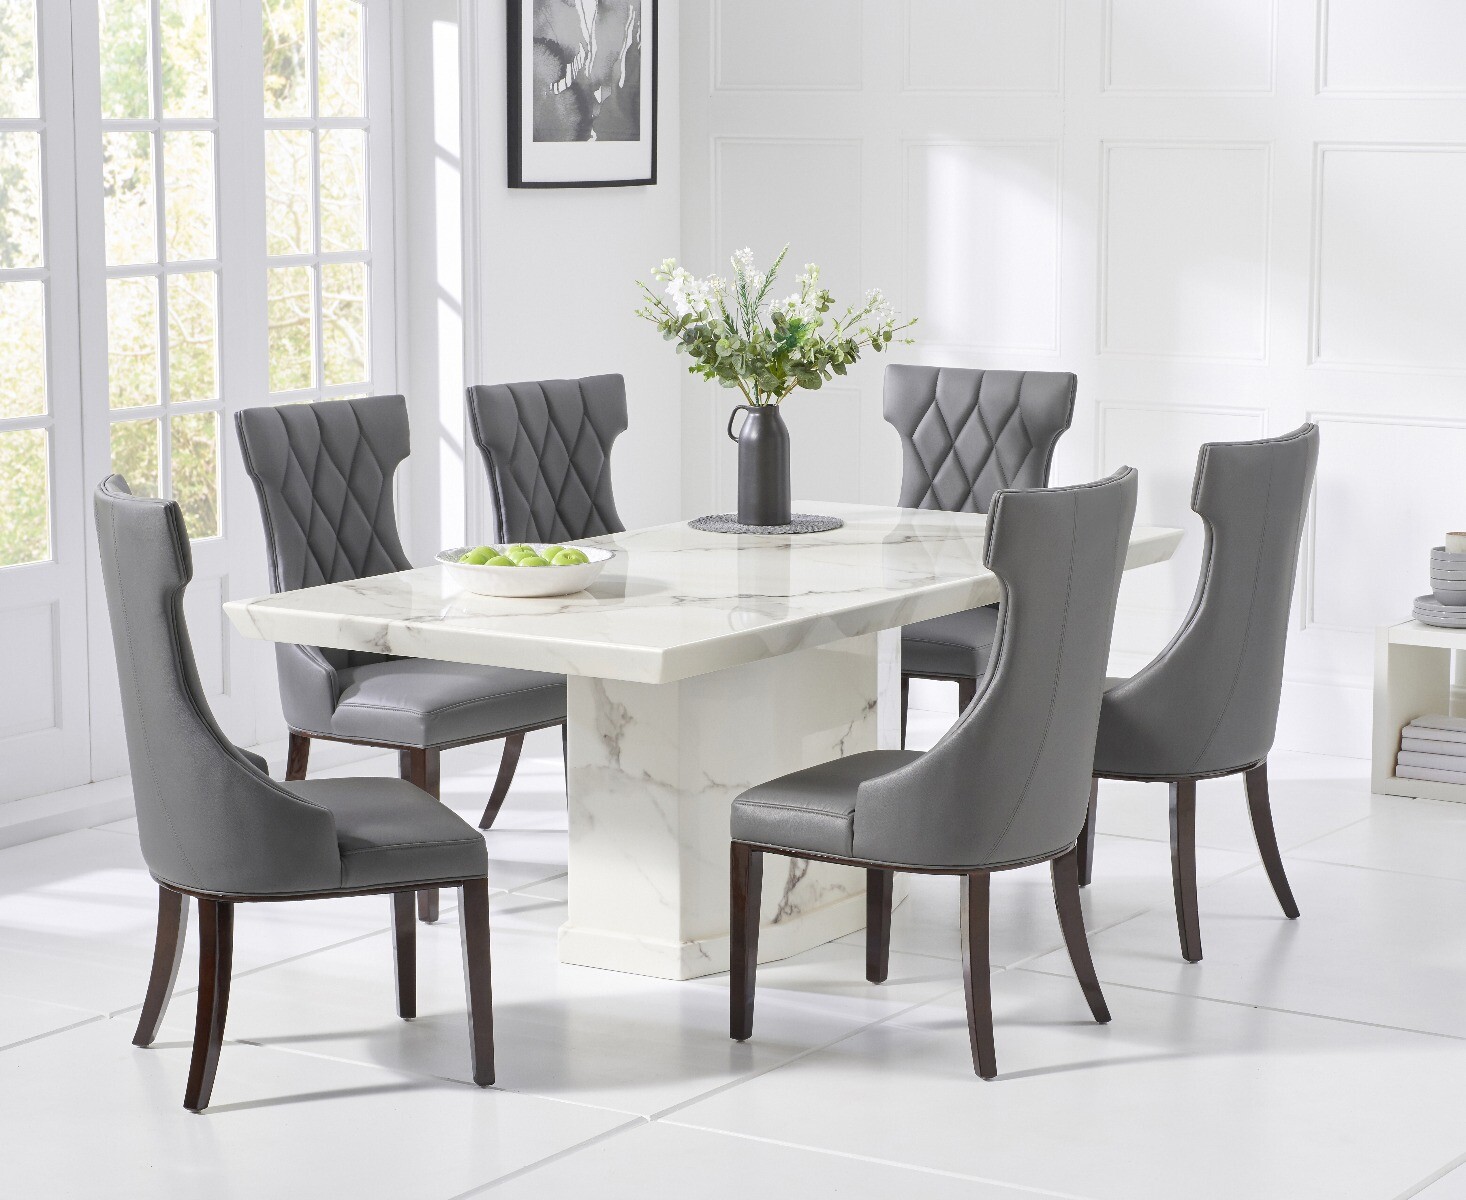 Photo 1 of Carvelle 200cm white pedestal marble dining table with 6 cream sophia chairs